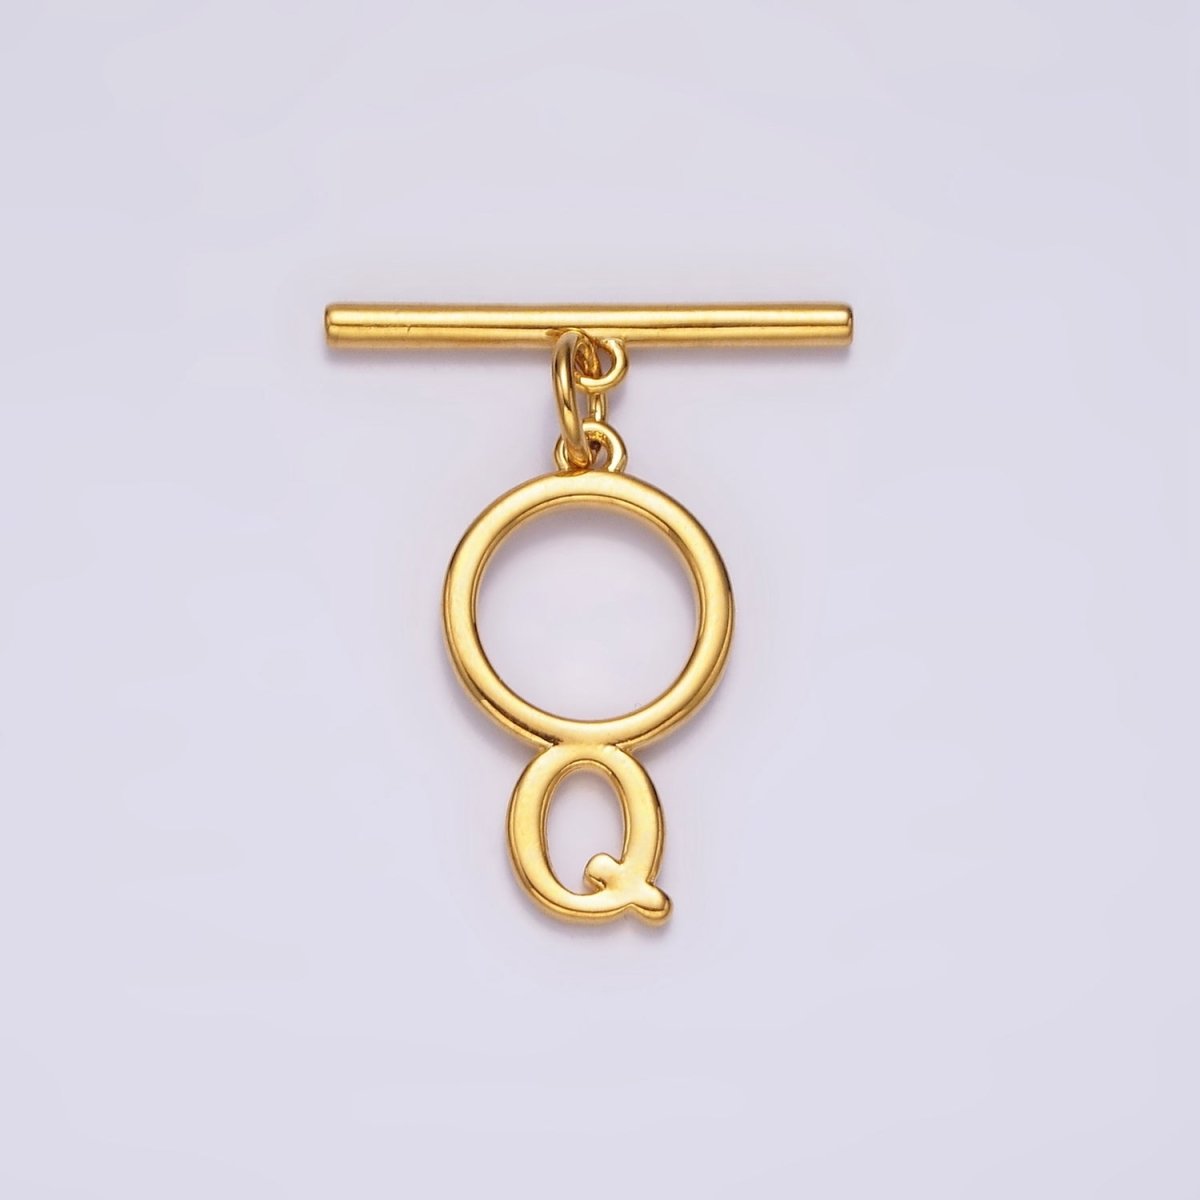 14K Gold Filled A-Z Initial Letter Toggle Clasps Closure Personalized Jewelry Making Findings Supply OT Clasp | A1325 - A1350 - DLUXCA